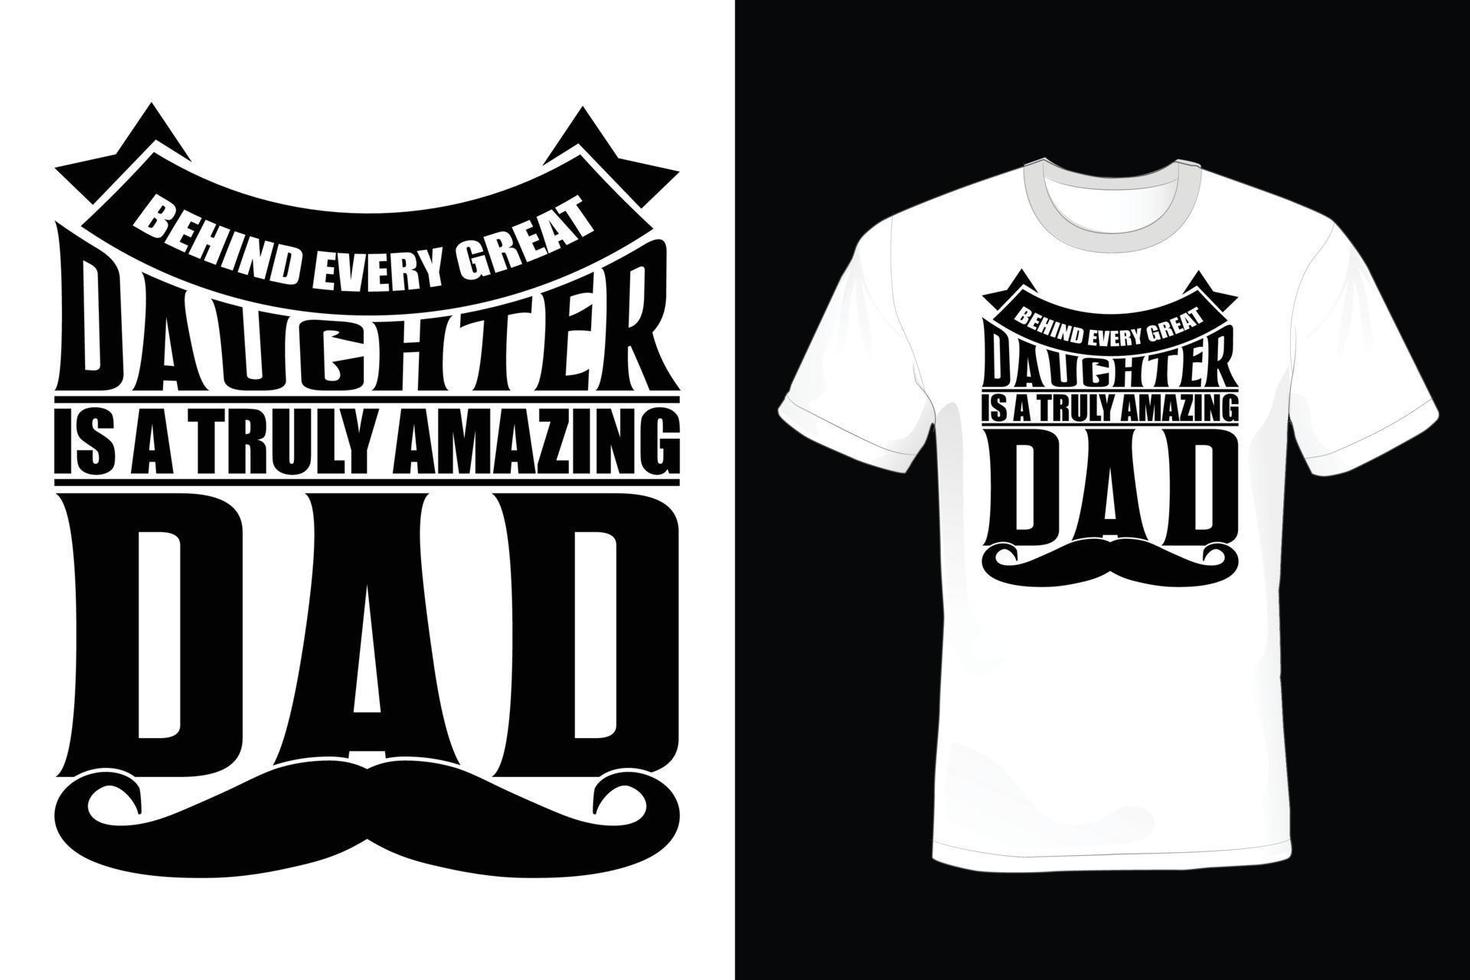 Father T shirt design, vintage, typography vector